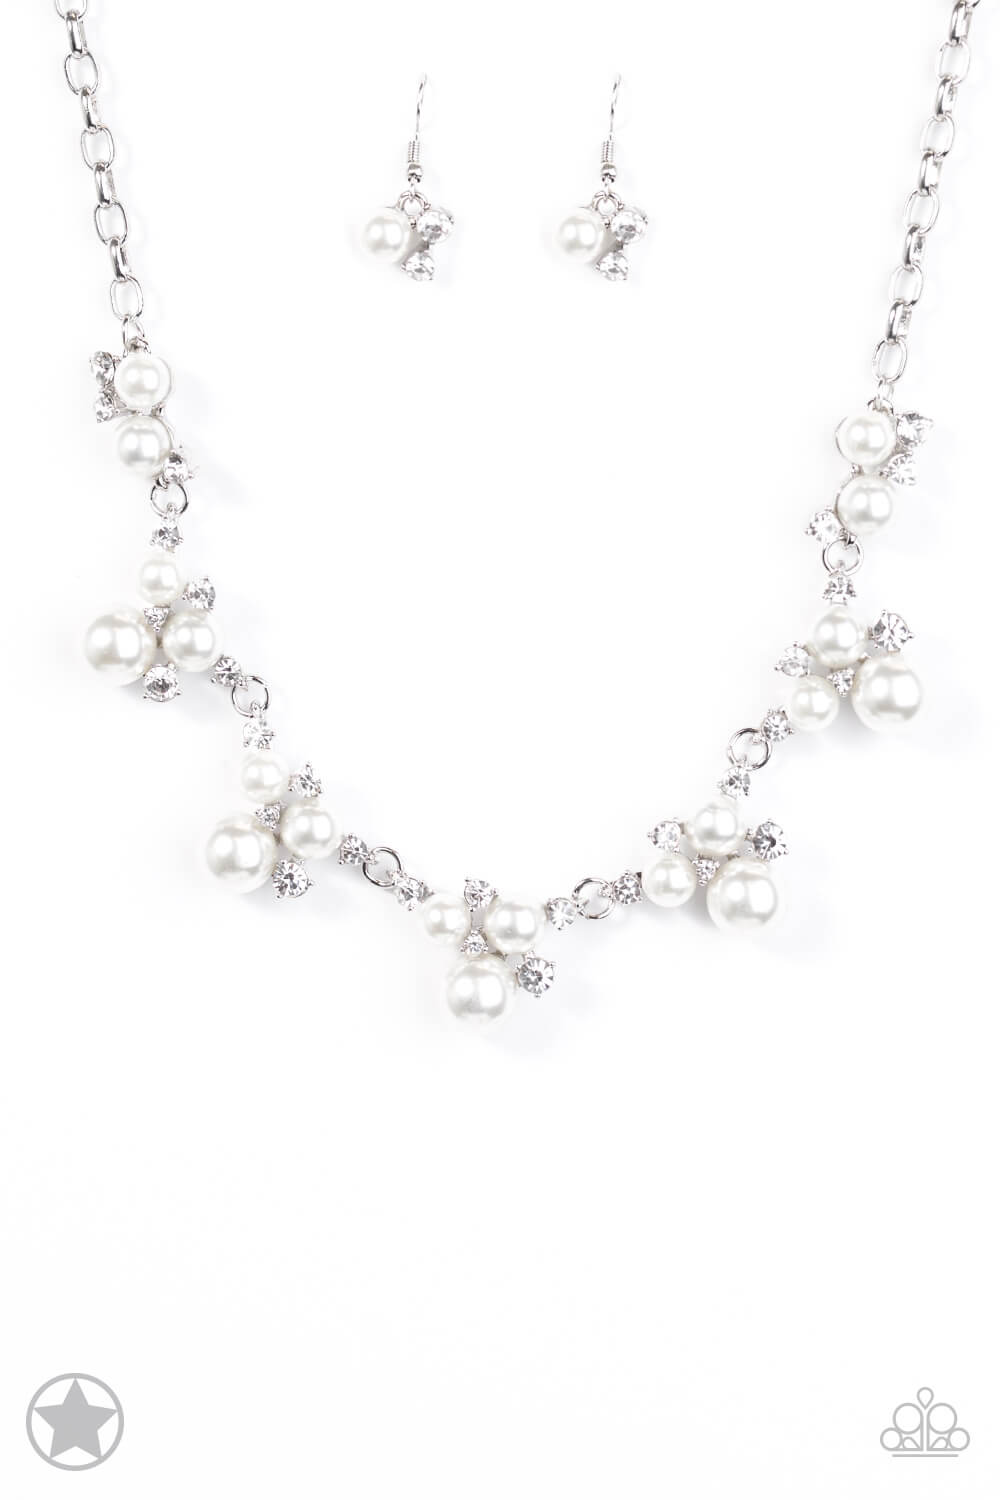 Toast To Perfection White Necklace Set - Princess Glam Shop